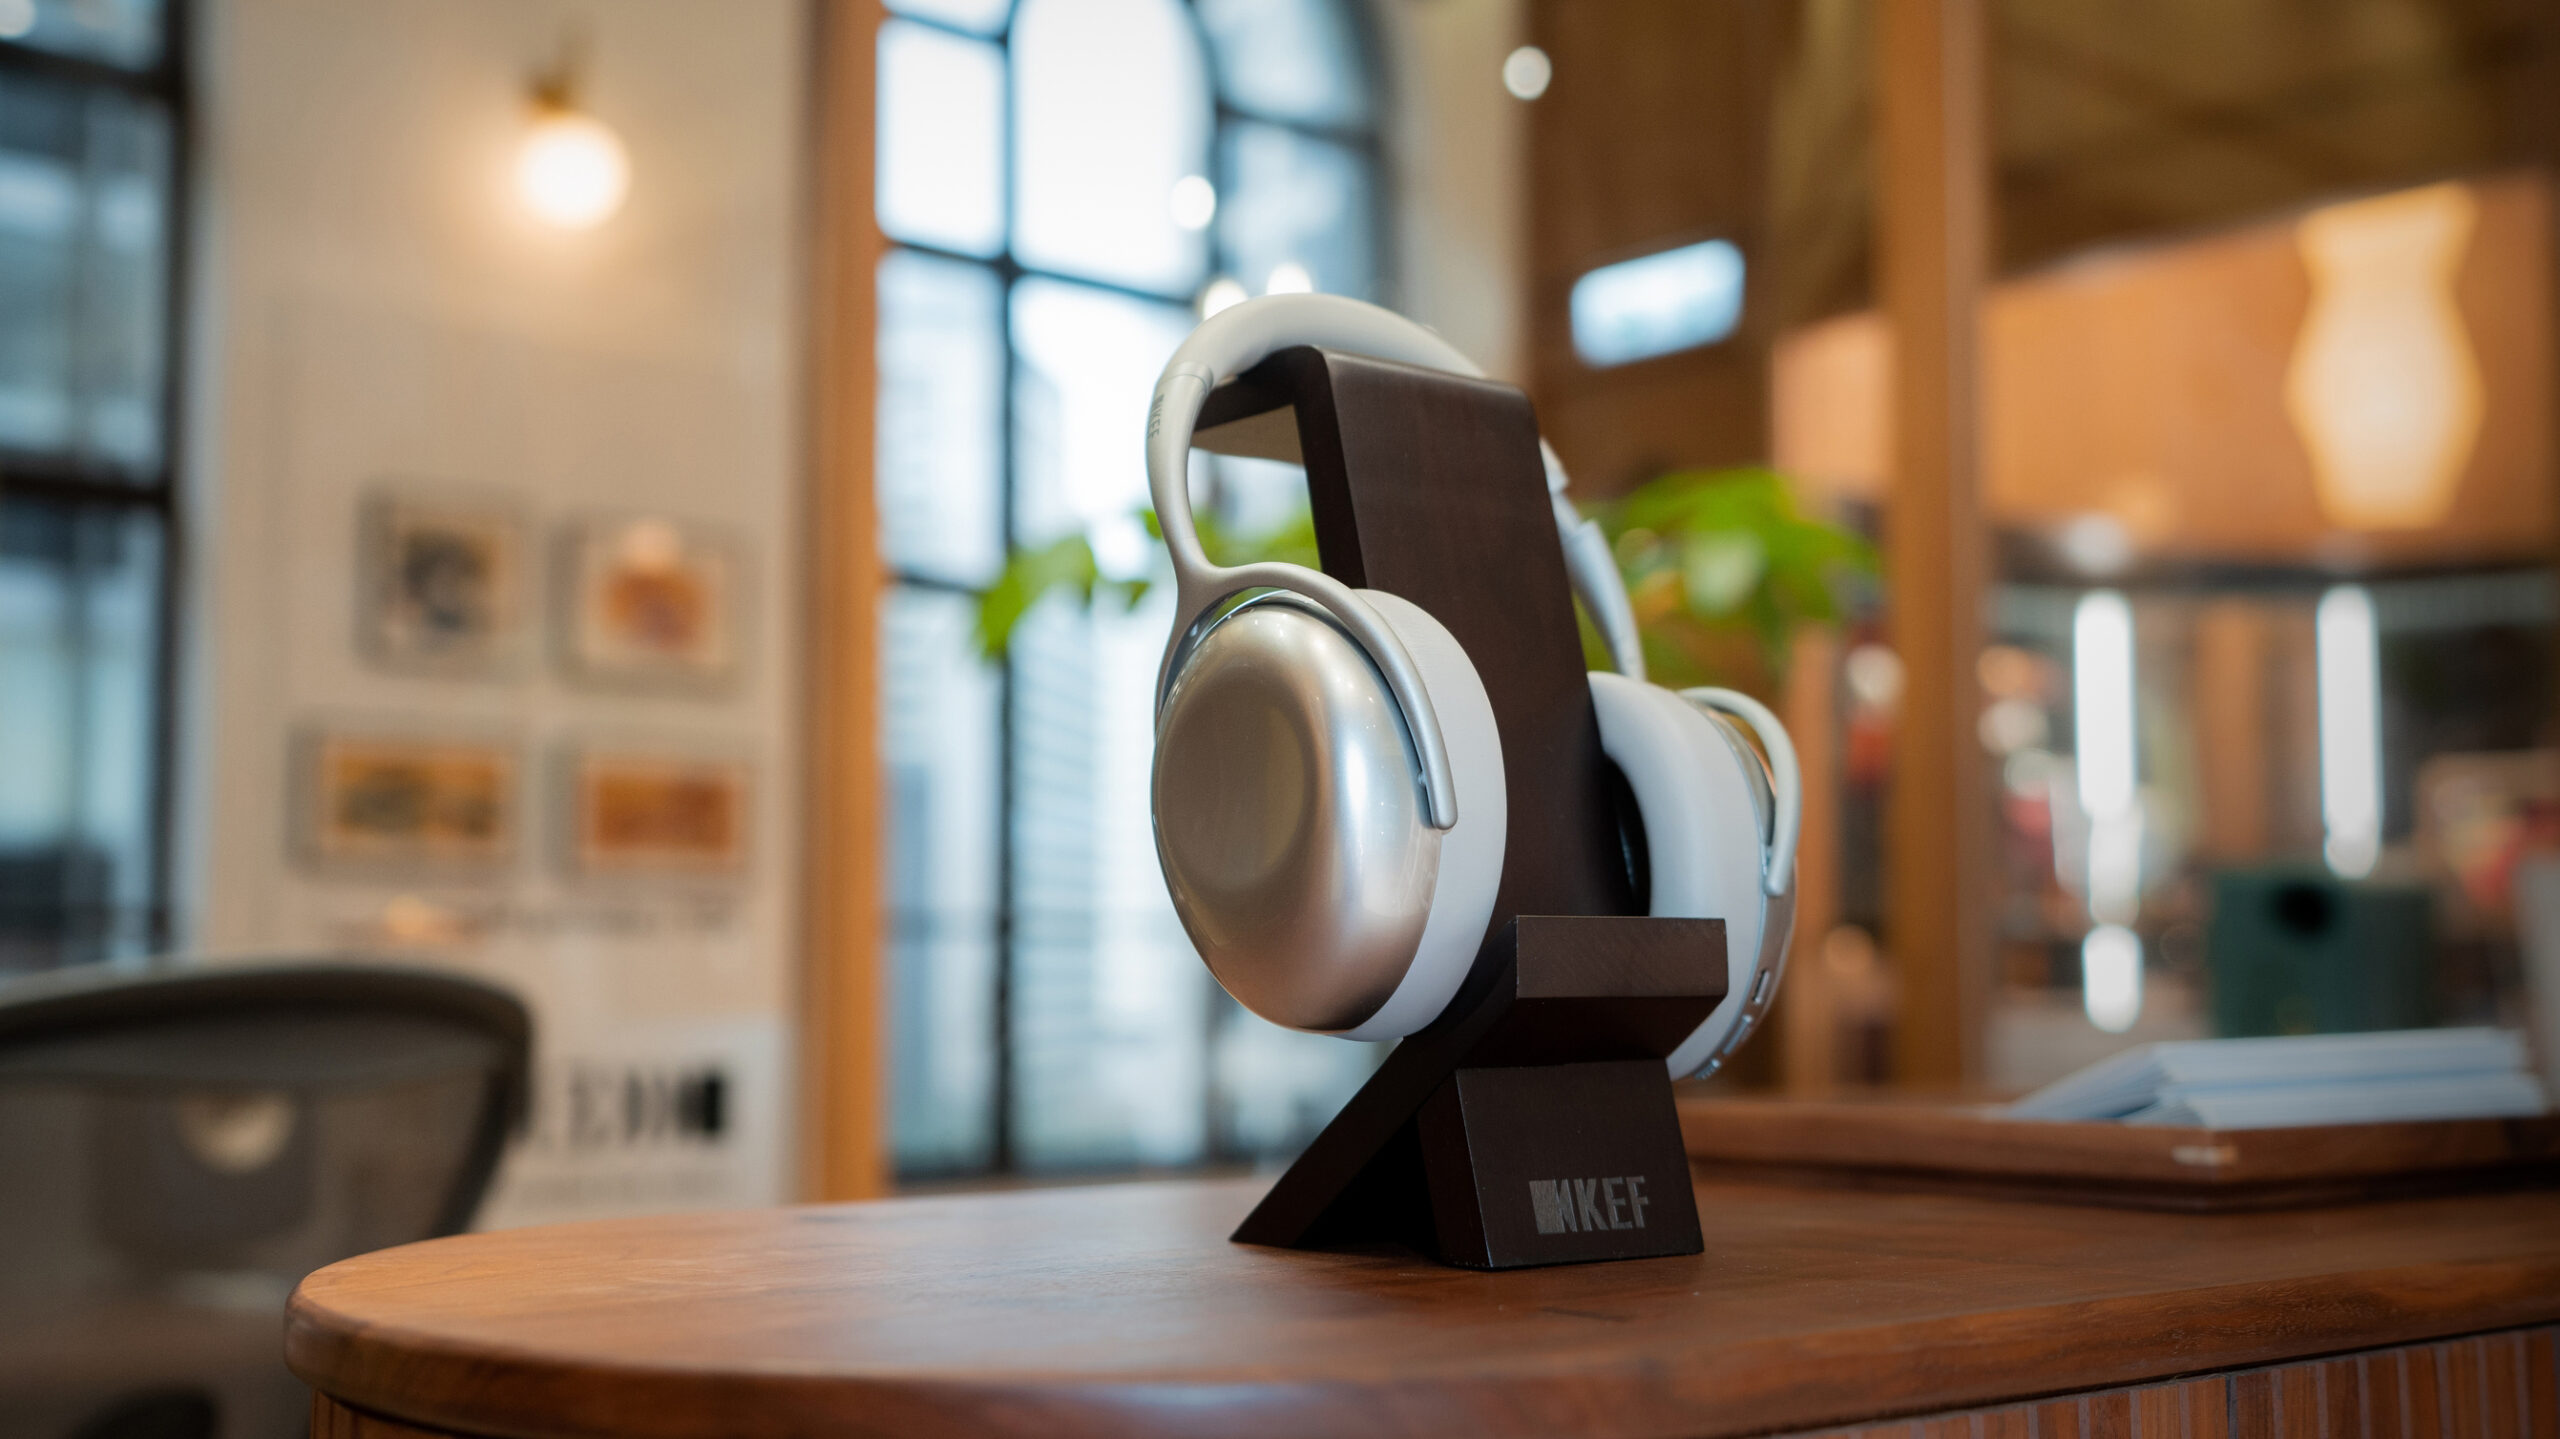 KEF Listening Room: Immerse yourself in the joy of KEF’s wireless speakers at Pedder Arcade